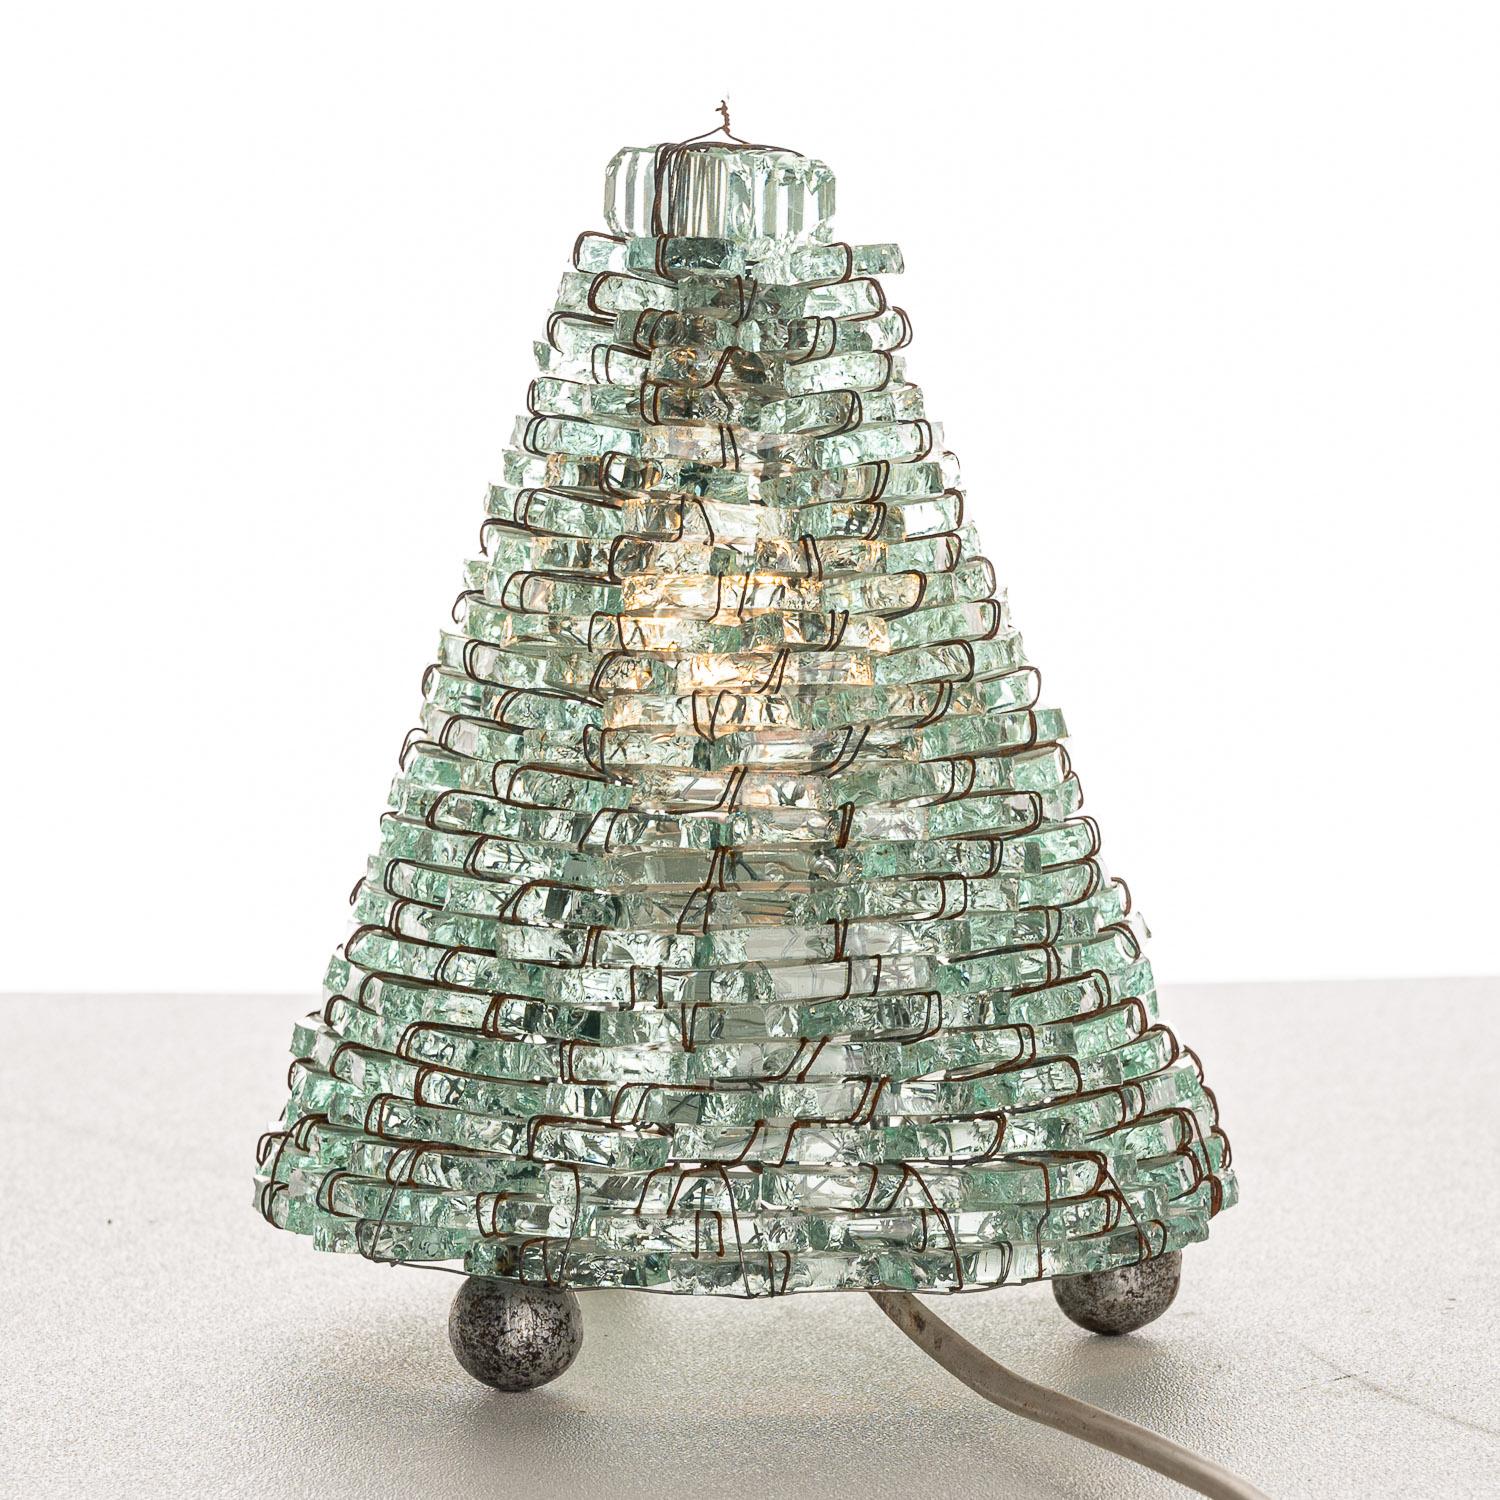 Hundreds of glass pieces stacked and wired to create a cone table lamp. 20th Century Italian design.